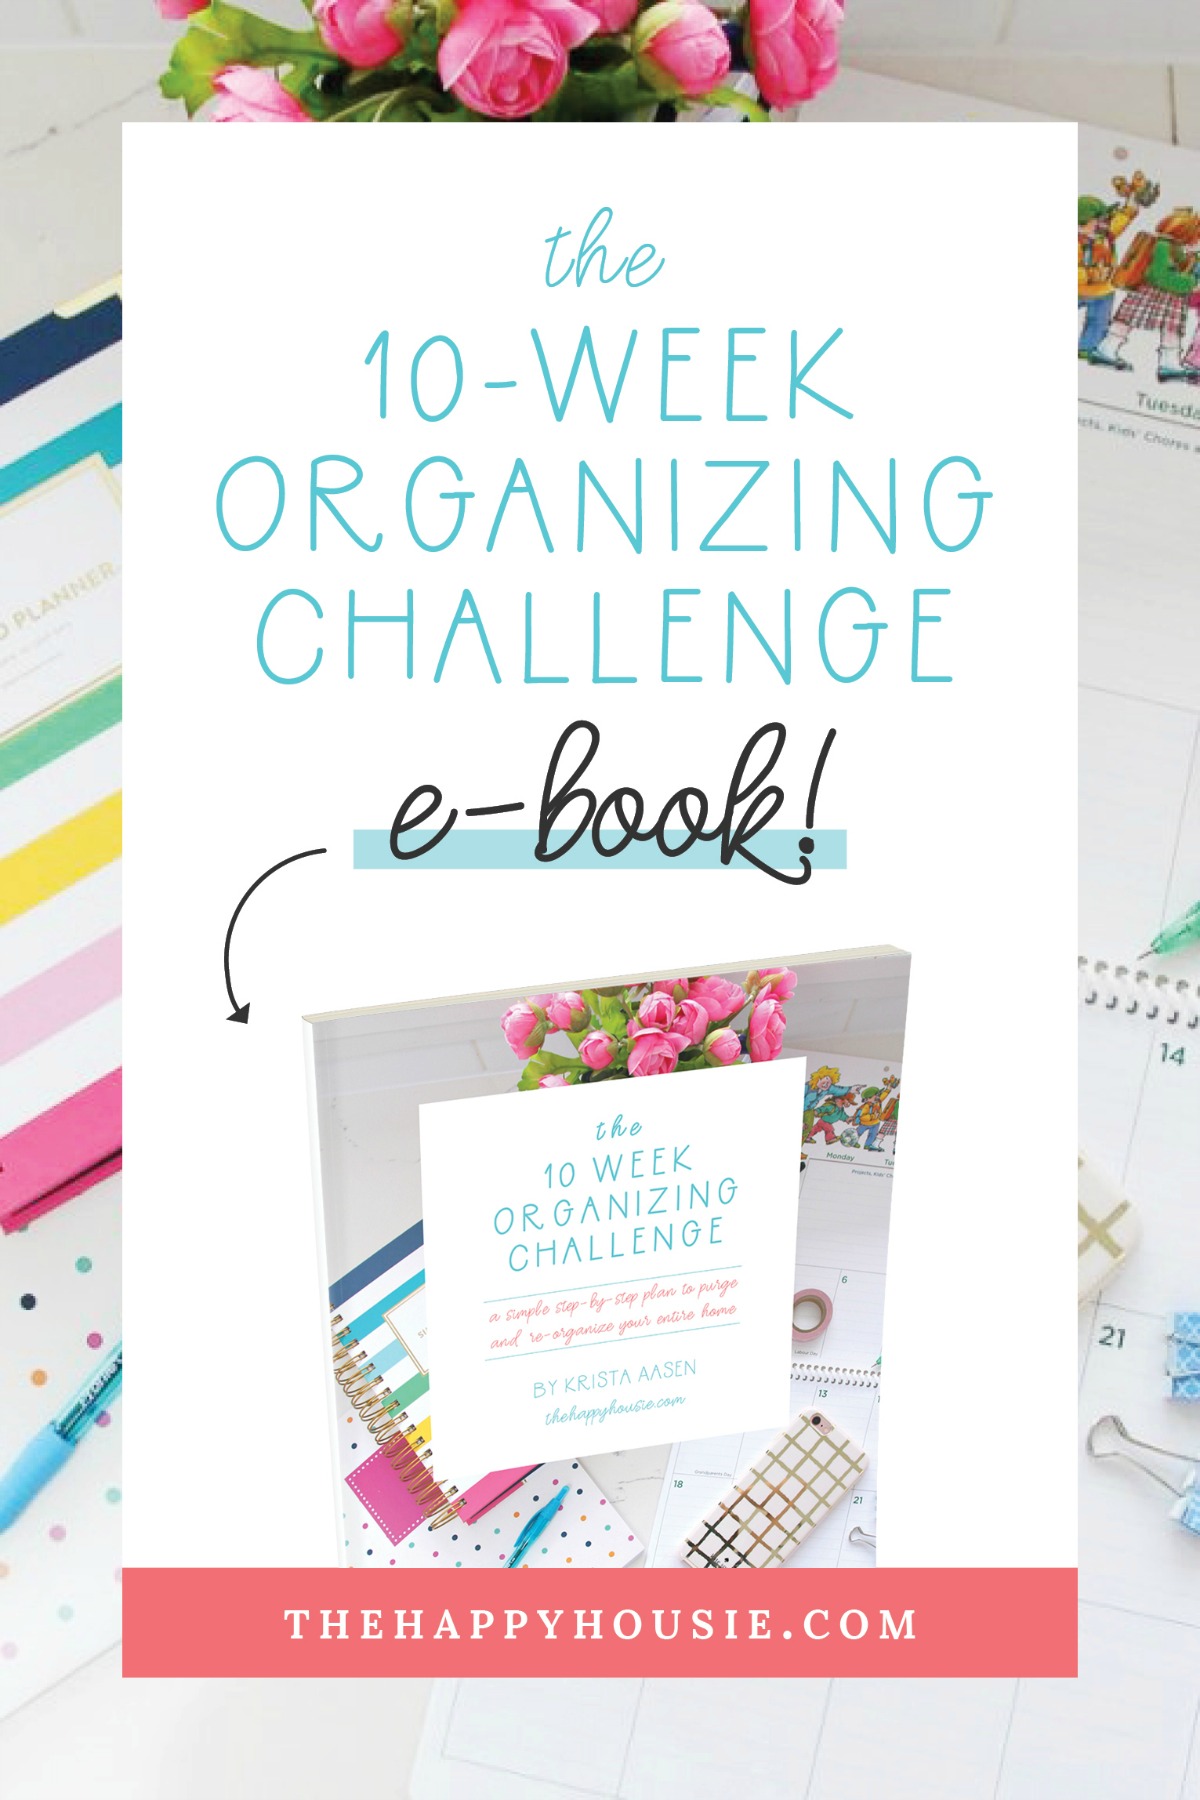 The 10-week organizing challenge ebook poster.